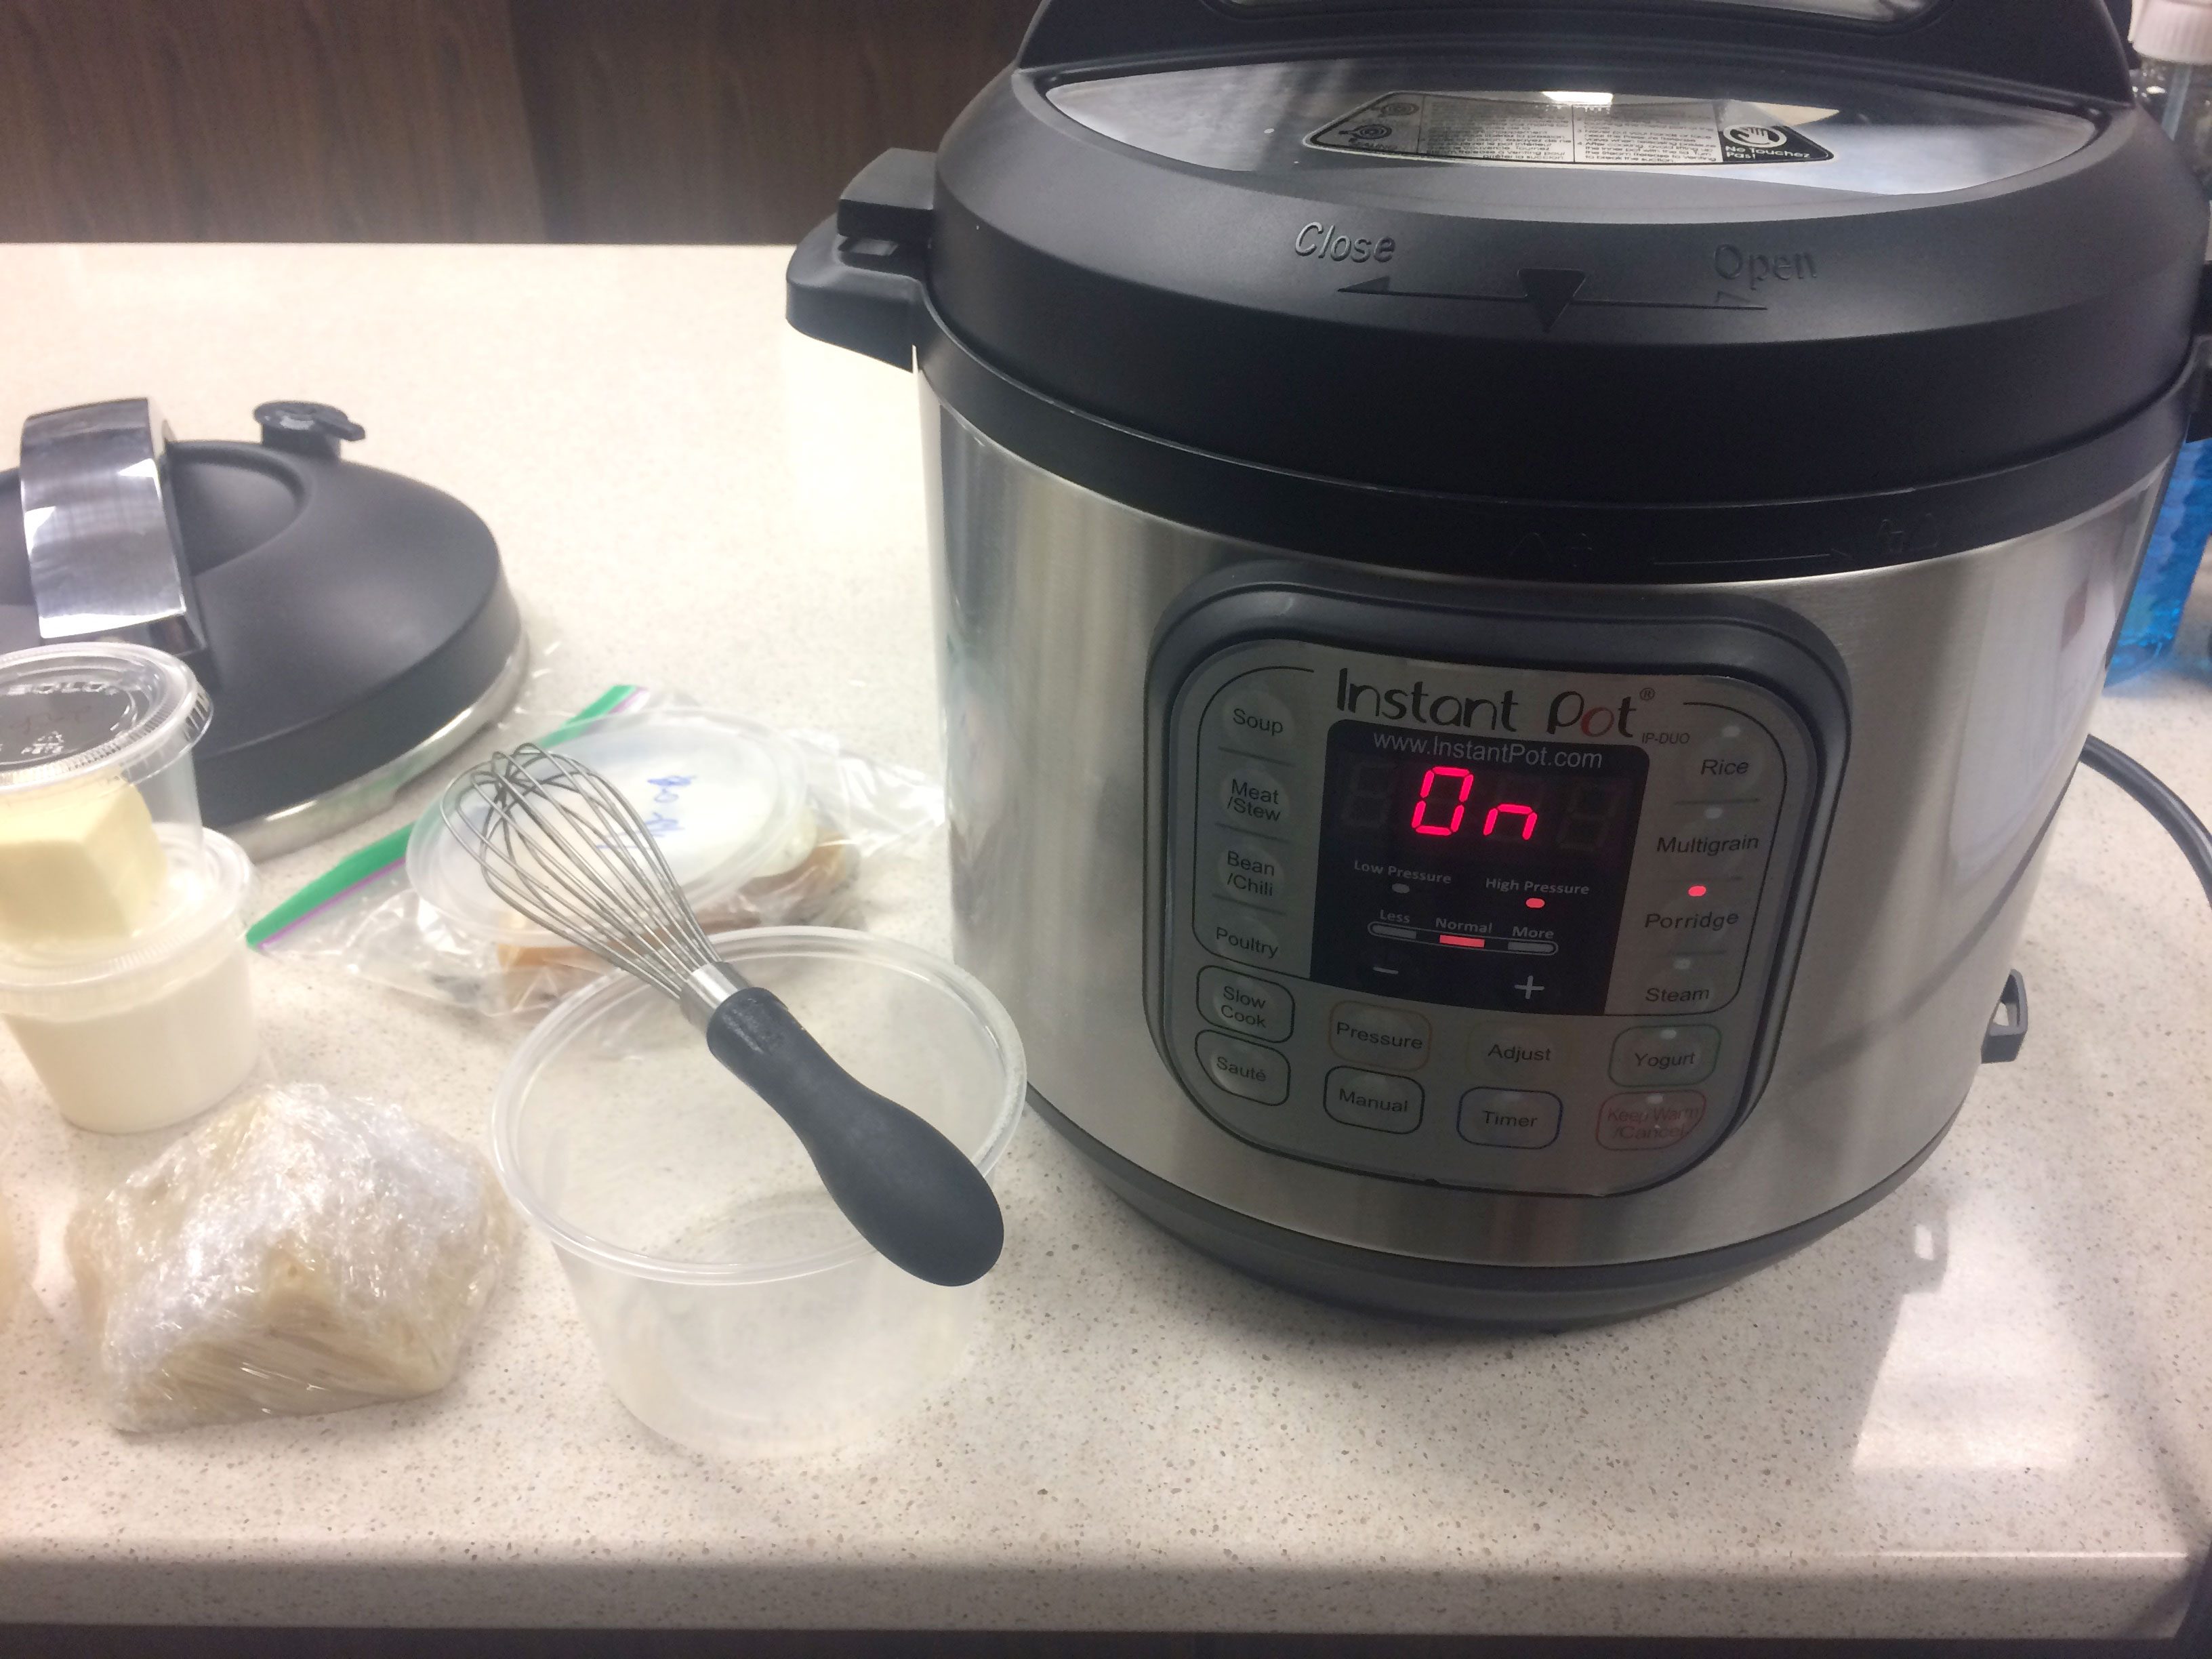 Top 6 Lessons from My Instant Pot Pro Slow Cooking Experience